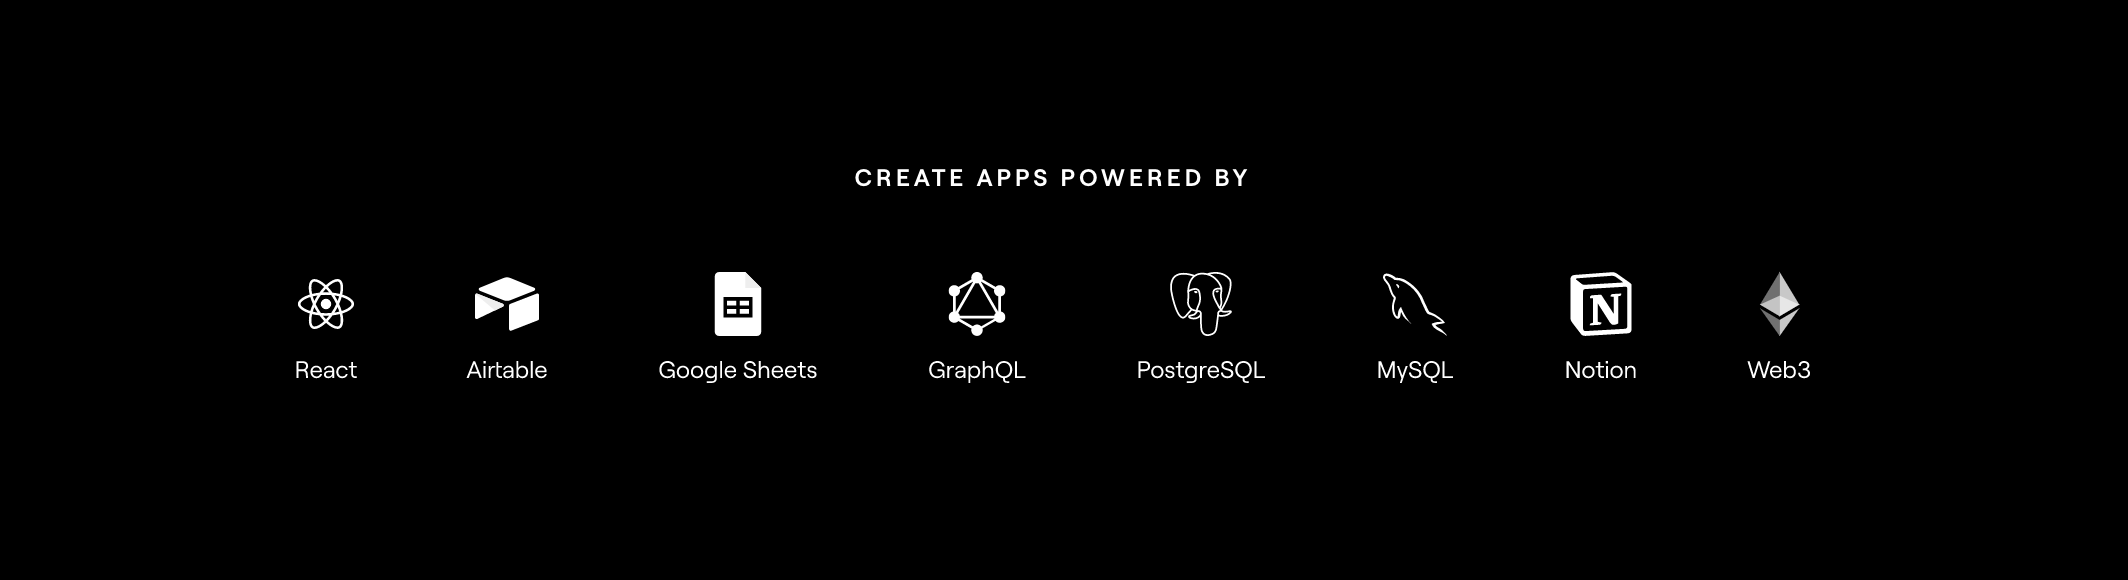 Create apps powered by: React, Airtable, Google Sheets, GraphQL, PostgreSQL, MySQL, Notion, Web3 and more...